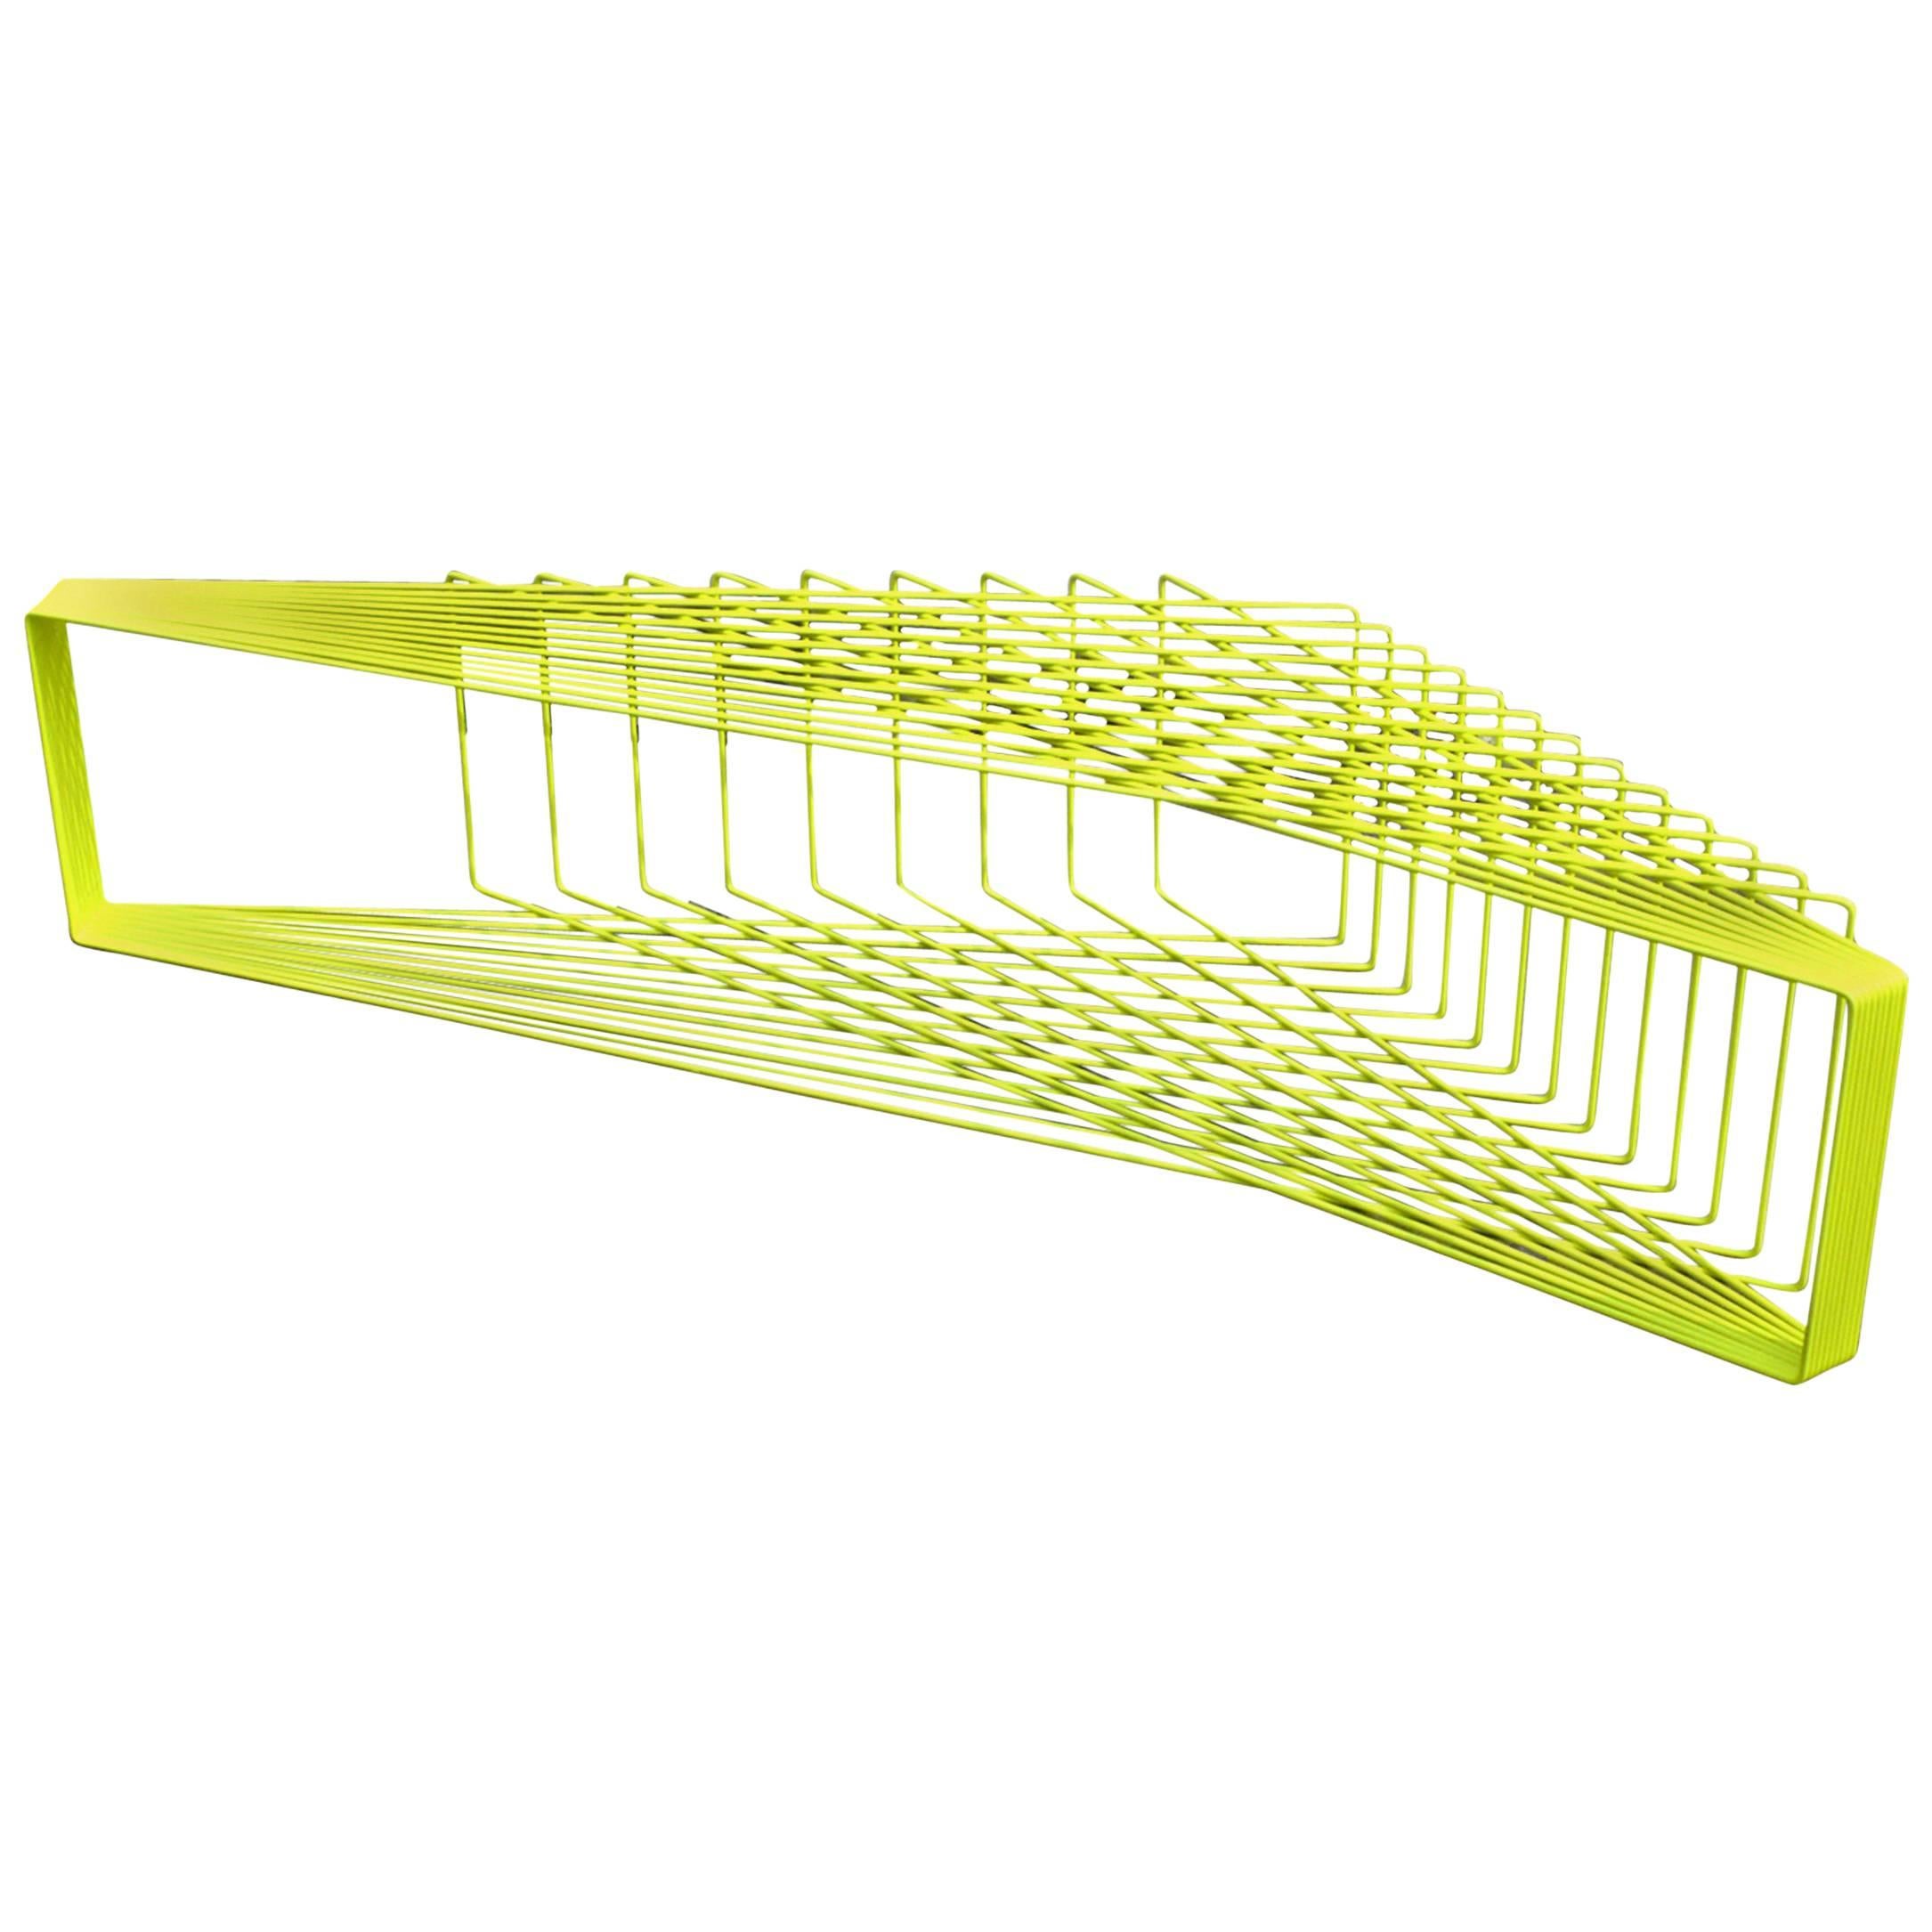 FIELD - Powder-Coated Steel Minimal Geometric Sculptural Bench Table For Sale